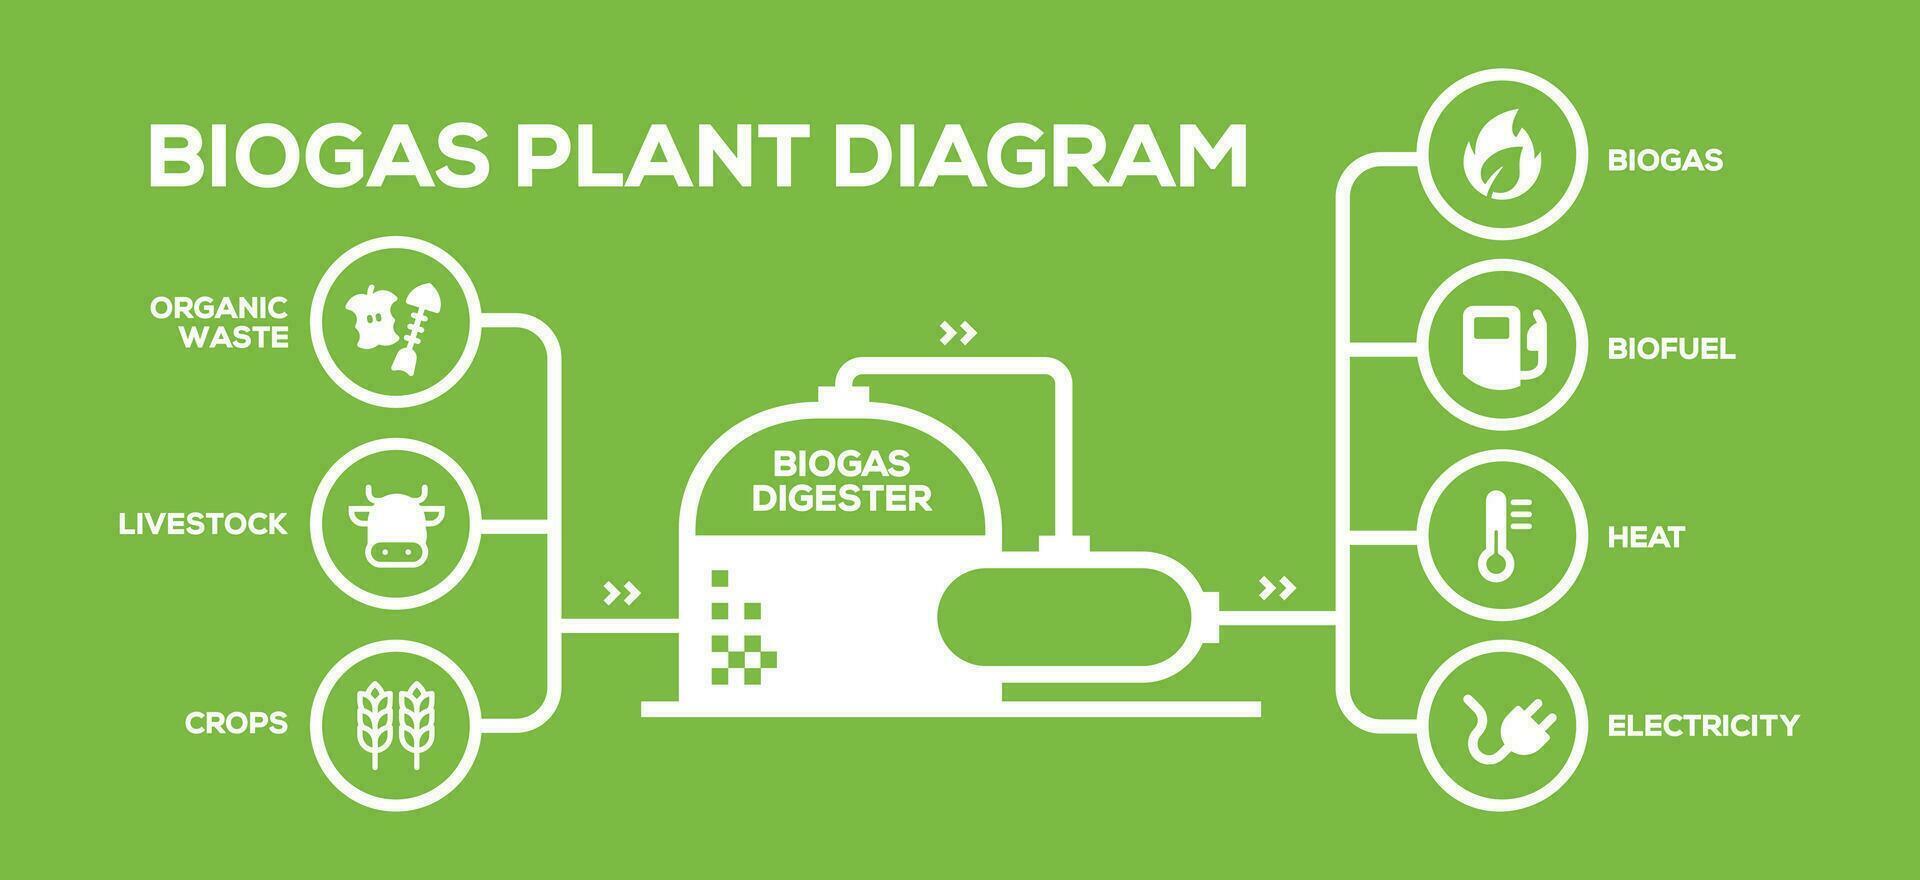 Simple Biogas Plant Diagram. Biogas Production Phases. Illustrated Educational Plan from Farming to Energy vector